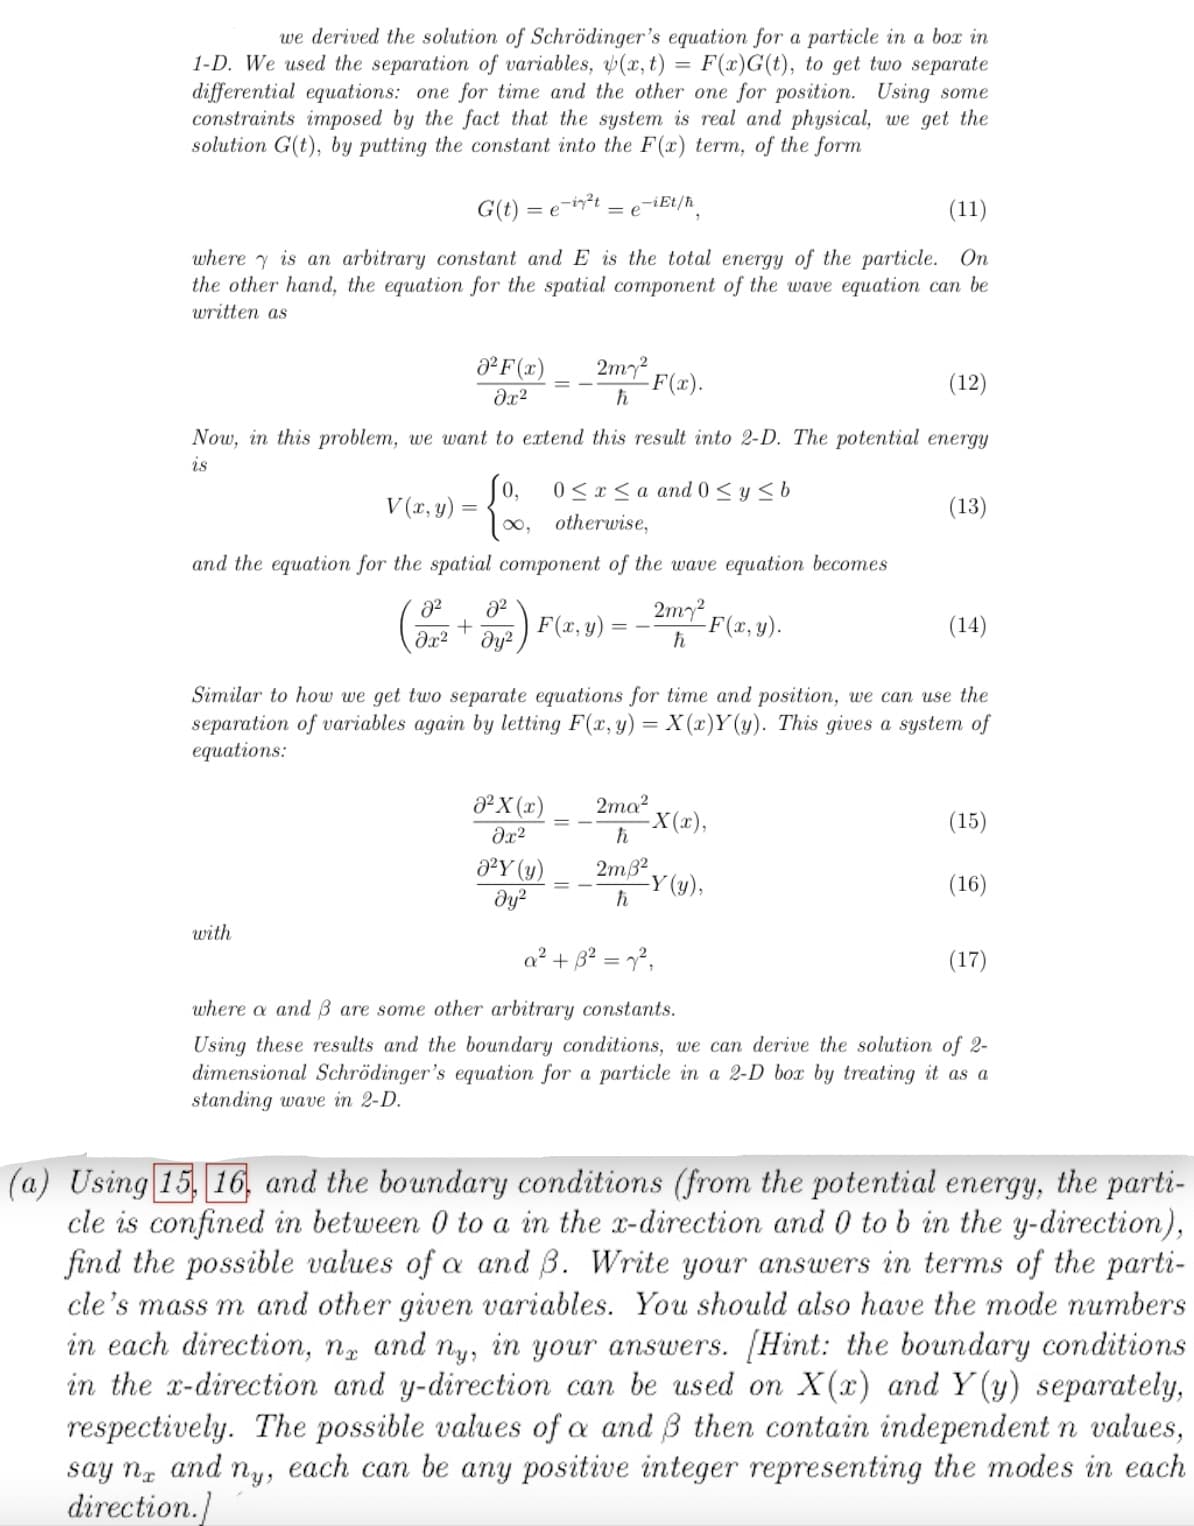 =
we derived the solution of Schrödinger's equation for a particle in a box in
1-D. We used the separation of variables, (x, t) F(x)G(t), to get two separate
differential equations: one for time and the other one for position. Using some
constraints imposed by the fact that the system is real and physical, we get the
solution G(t), by putting the constant into the F(xr) term, of the form
G(t)=
(11)
where is an arbitrary constant and E is the total energy of the particle. On
the other hand, the equation for the spatial component of the wave equation can be
written as
=e-i²t
² F(x)
əx²
V(x, y):
with
(12)
Now, in this problem, we want to extend this result into 2-D. The potential energy
is
2² 8²
+
əx² дуг
Jo, 0≤x≤a and 0 ≤ y ≤ b
[∞, otherwise,
and the equation for the spatial component of the wave equation becomes
-iEt/ħ
= e
²X (x)
əx²
2m² F(x).
ħ
0²Y (y)
Əy²
F(x,y)
Similar to how we get two separate equations for time and position, we can use the
separation of variables again by letting F(x, y) = X(x)Y(y). This gives a system of
equations:
2m7²
h
2ma²
ħ
2m3²
h
-F(x,y).
-X(x),
(13)
-Y (y),
(14)
(15)
(16)
a² + 3² = 7²,
where a and 3 are some other arbitrary constants.
Using these results and the boundary conditions, we can derive the solution of 2-
dimensional Schrödinger's equation for a particle in a 2-D box by treating it as a
standing wave in 2-D.
(17)
(a) Using 15, 16, and the boundary conditions (from the potential energy, the parti-
cle is confined in between 0 to a in the x-direction and 0 to b in the y-direction),
find the possible values of a and 3. Write your answers in terms of the parti-
cle's mass m and other given variables. You should also have the mode numbers
in each direction, na and ny, in your answers. [Hint: the boundary conditions
in the x-direction and y-direction can be used on X(x) and Y(y) separately,
respectively. The possible values of a and B then contain independent n values,
say na and ny, each can be any positive integer representing the modes in each
direction.]